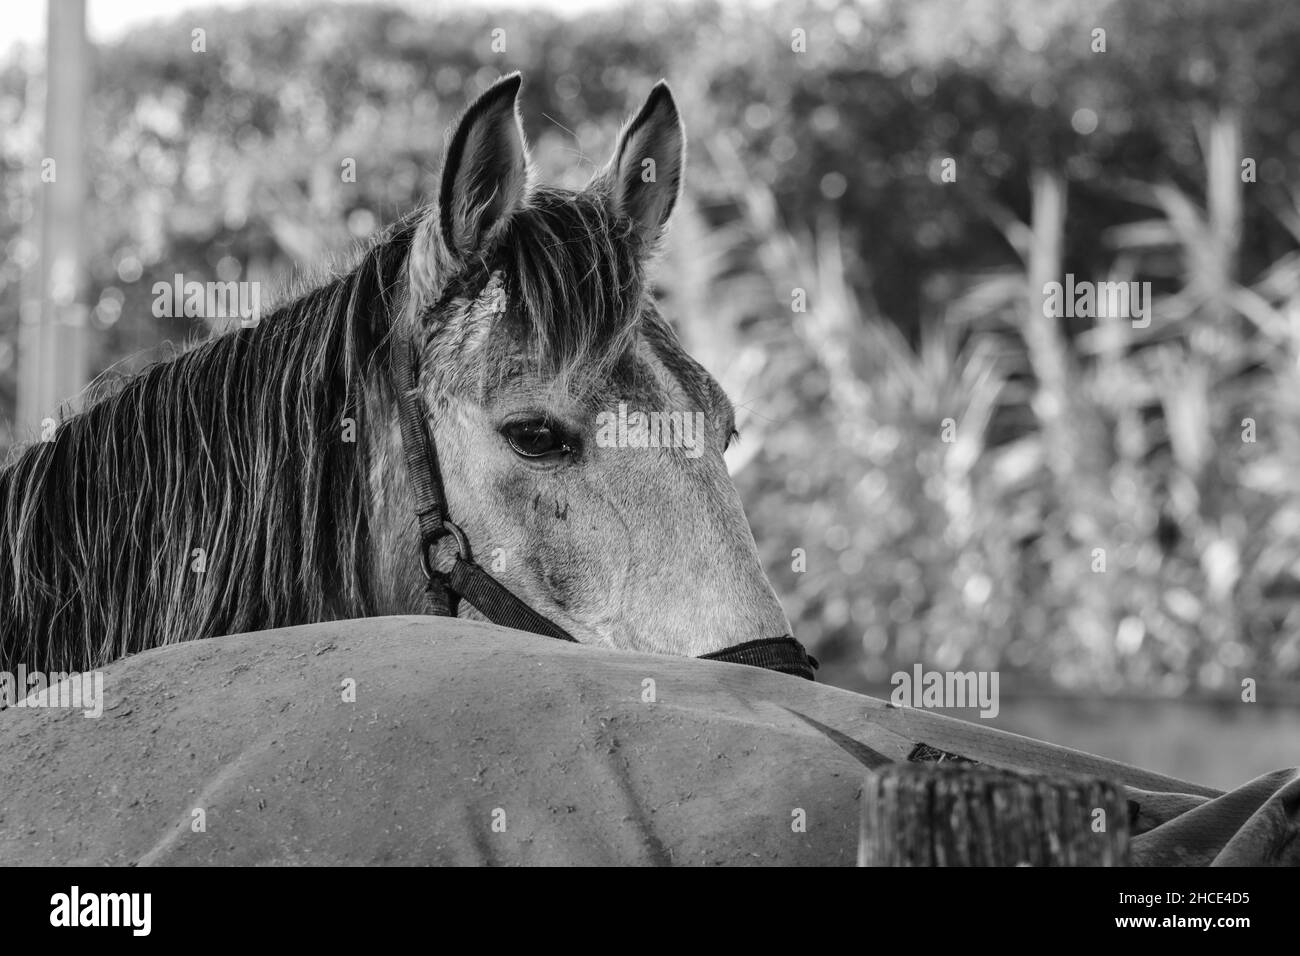 Brown Horse posing with vegetation in background Stock Photo